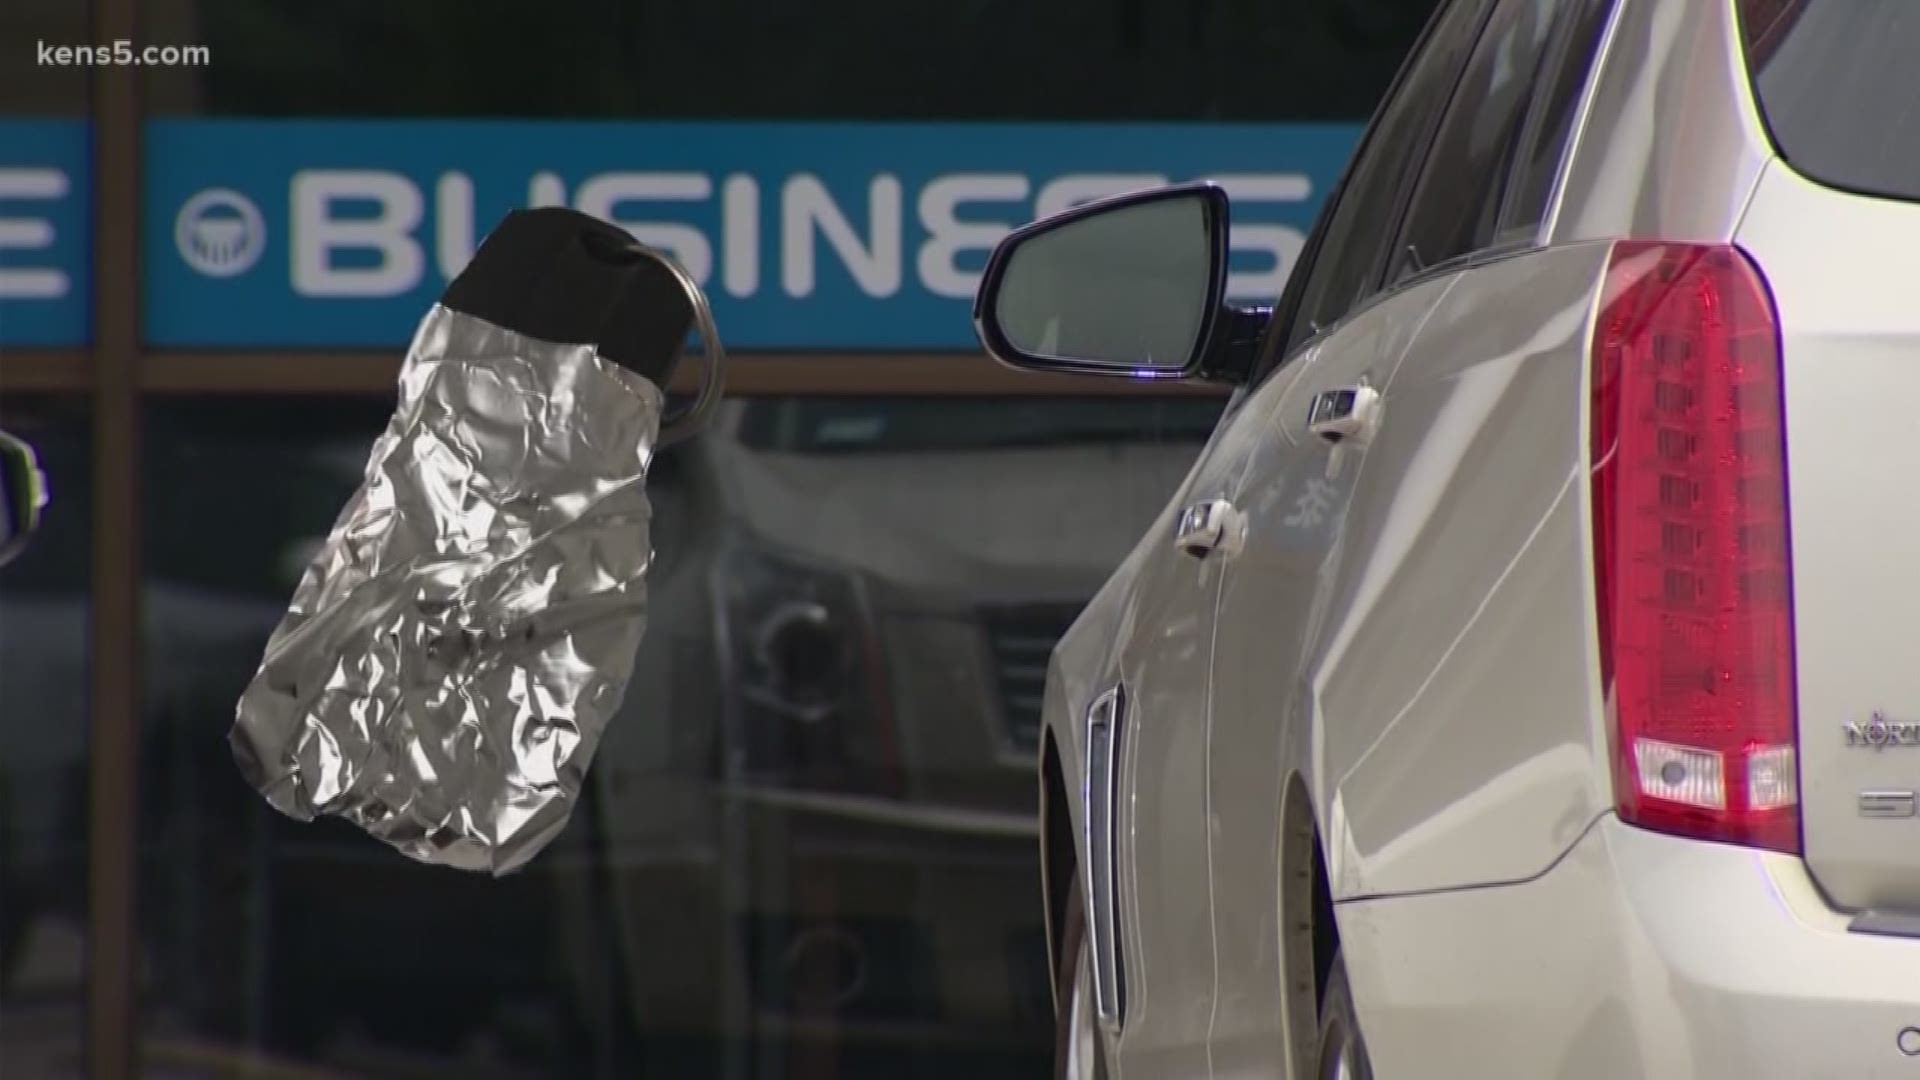 Cars are getting more high tech, and thieves are using that to their advantage. Police say hackers can steal signals from key fobs to break into vehicles. KENS 5 puts a cheap method to protect yourself to the test.